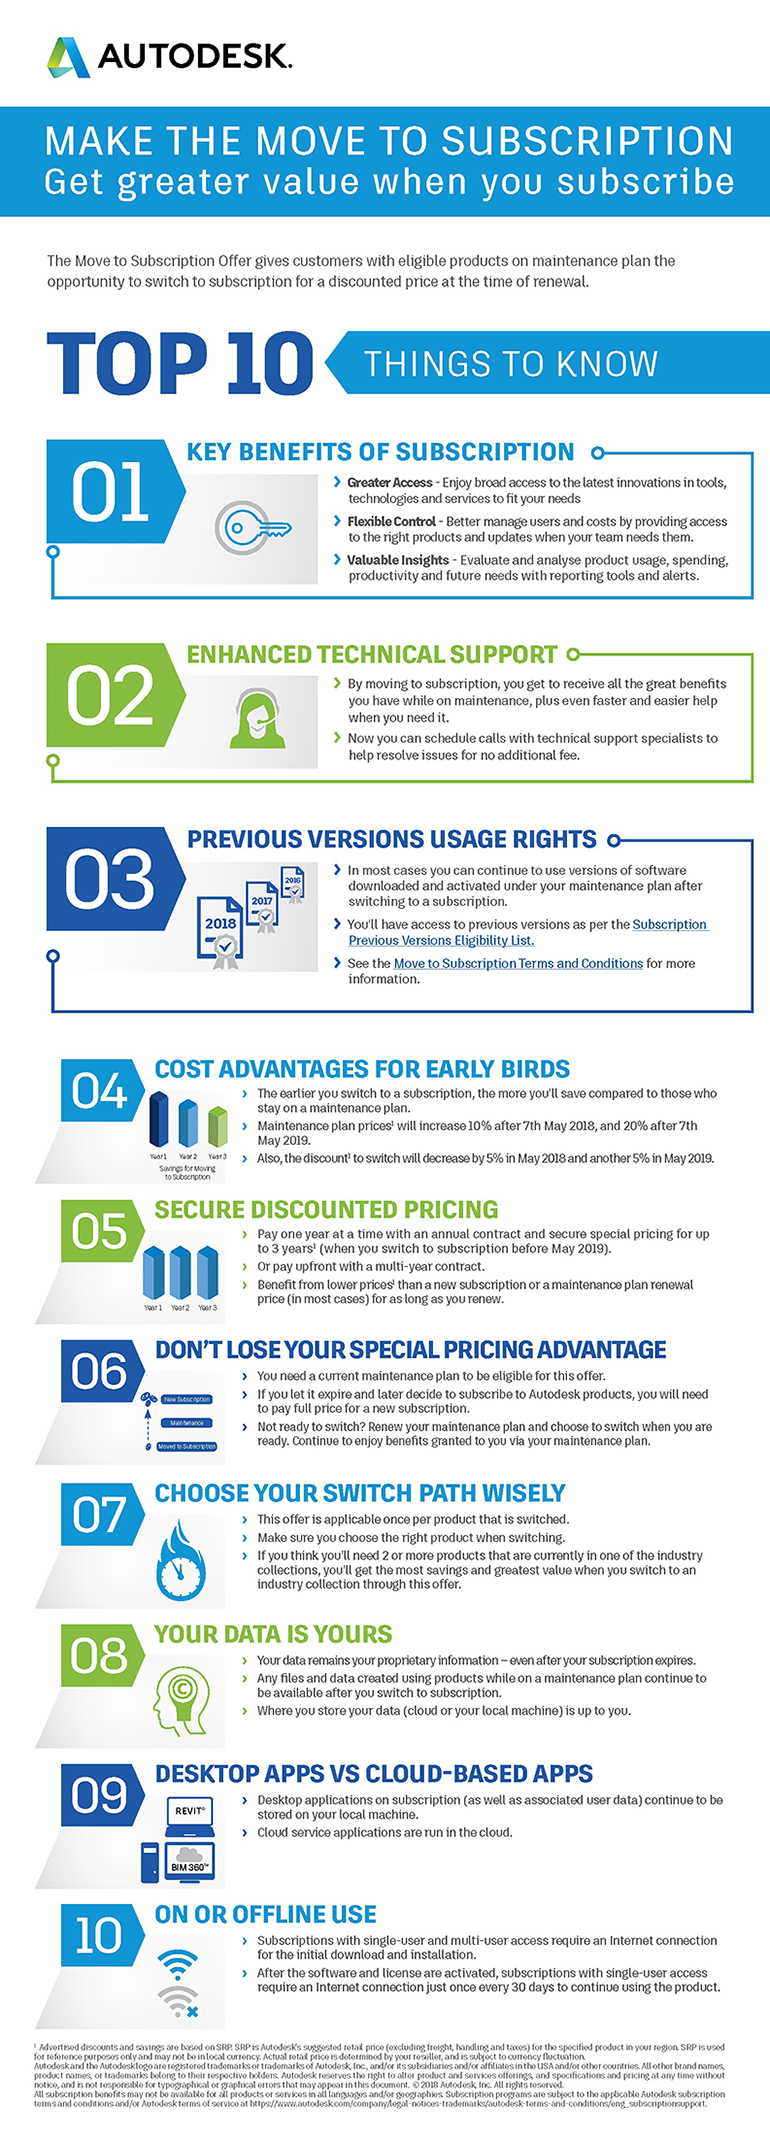 Infographic displaying the Top 10 Things to Know About Subscribing to Autodesk.